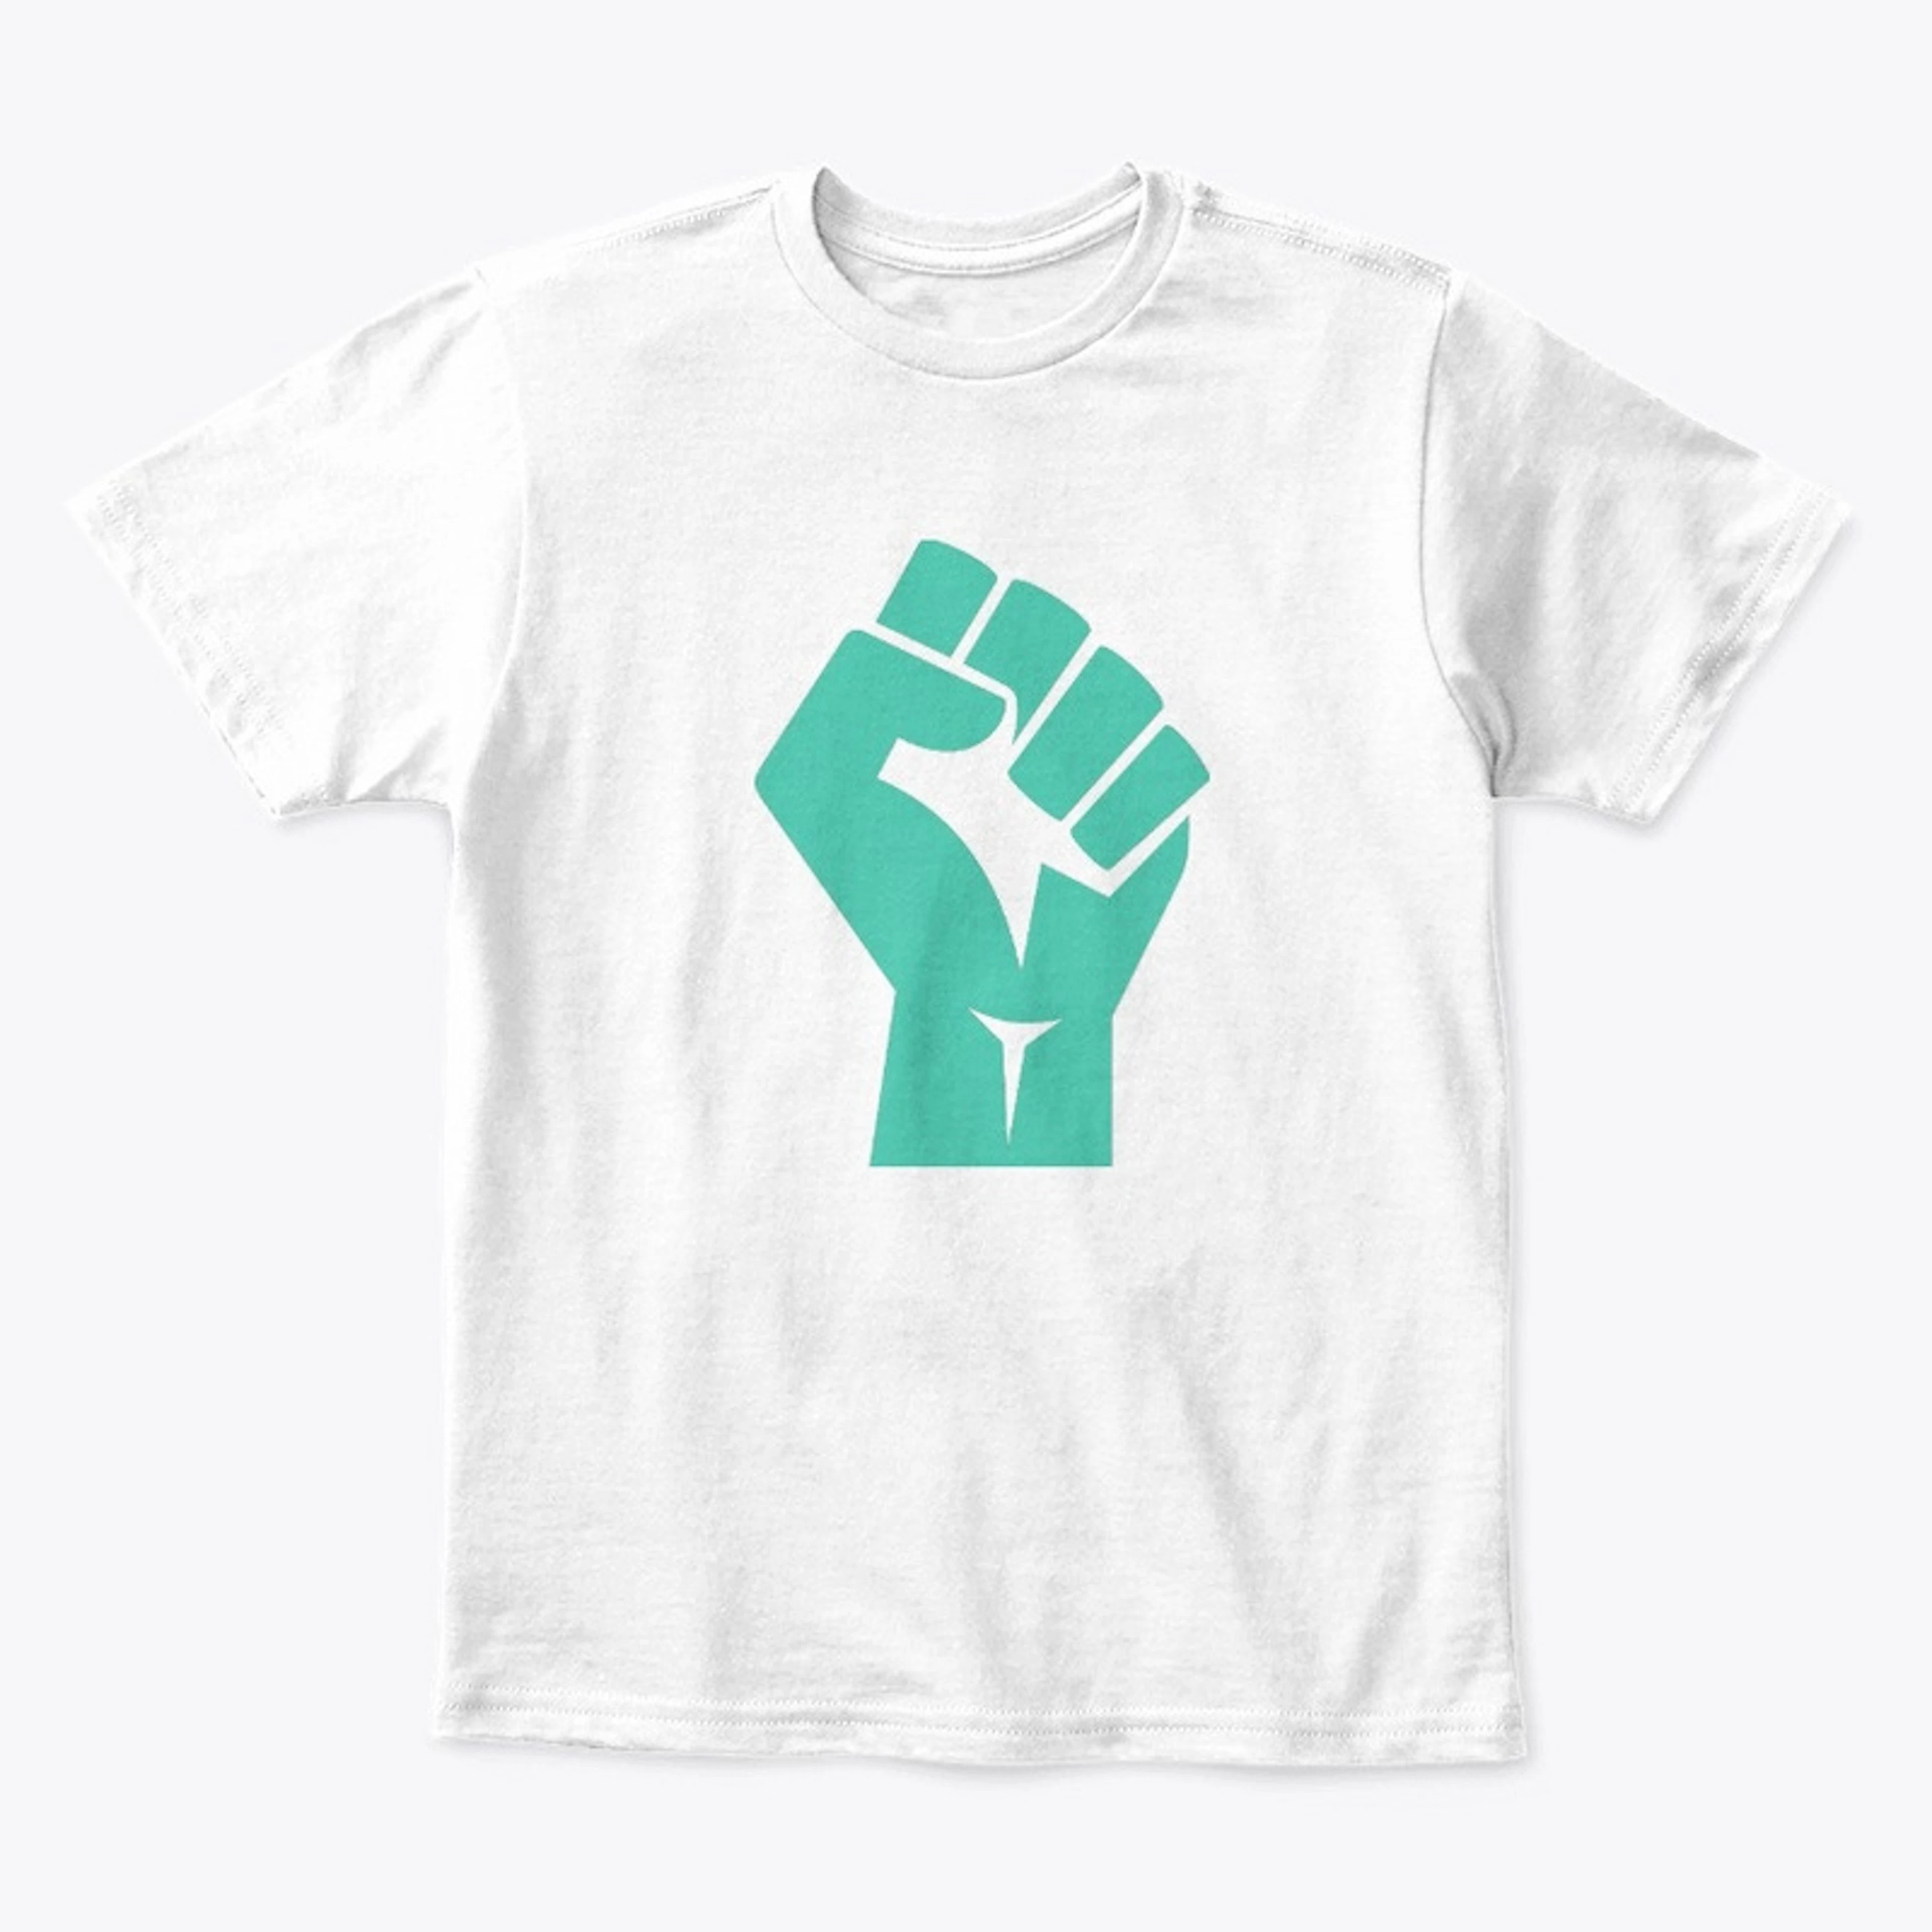 Fists Up Teal